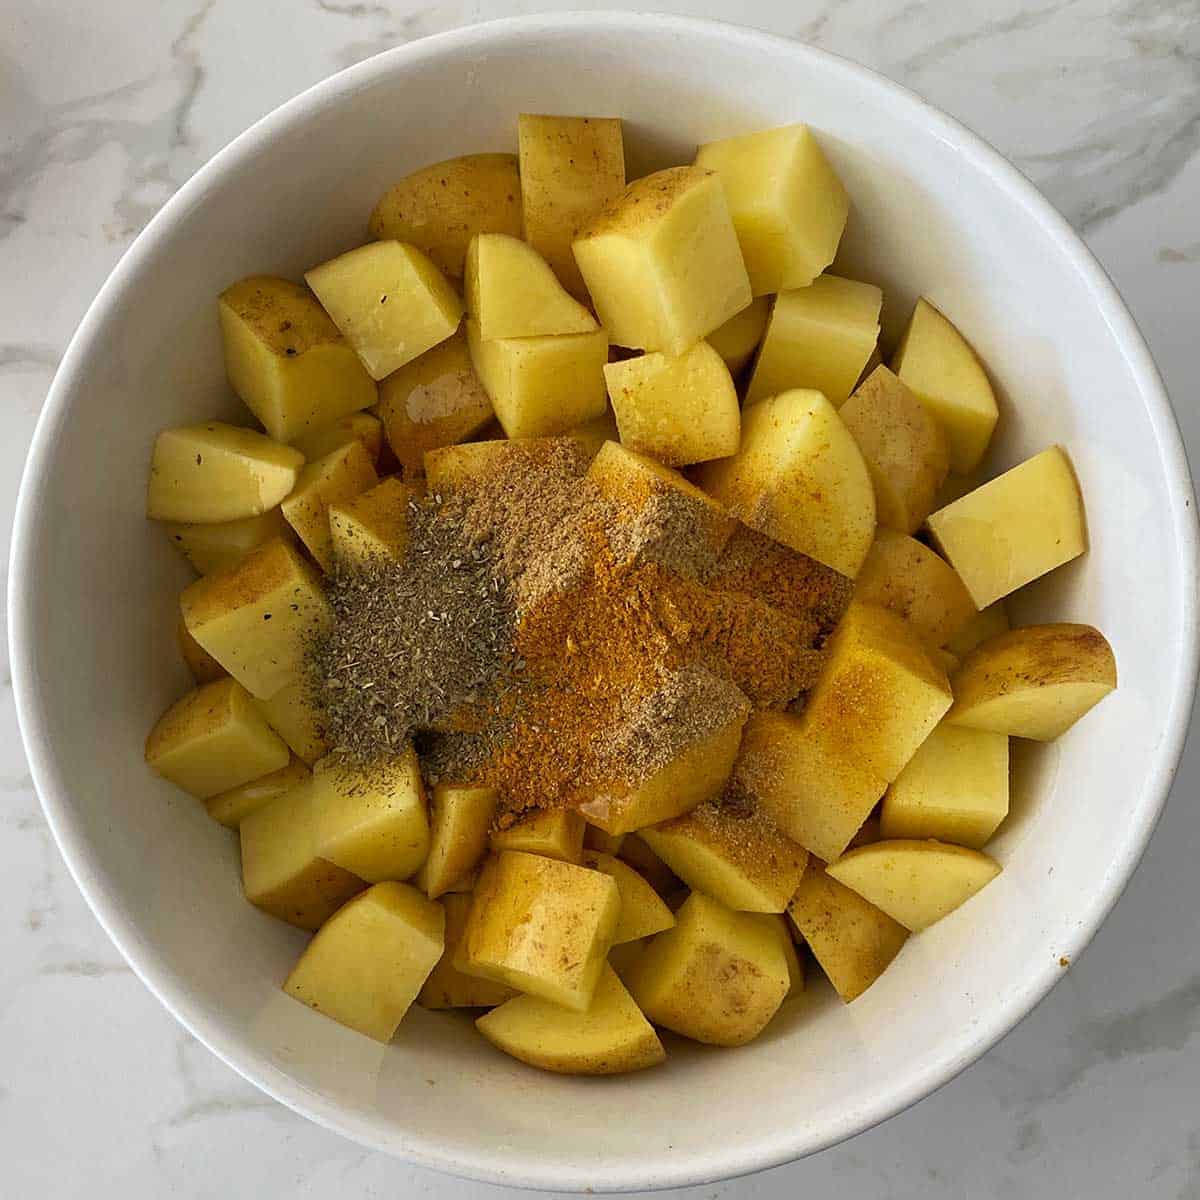 Spices in a bowl with cubed potatoes.